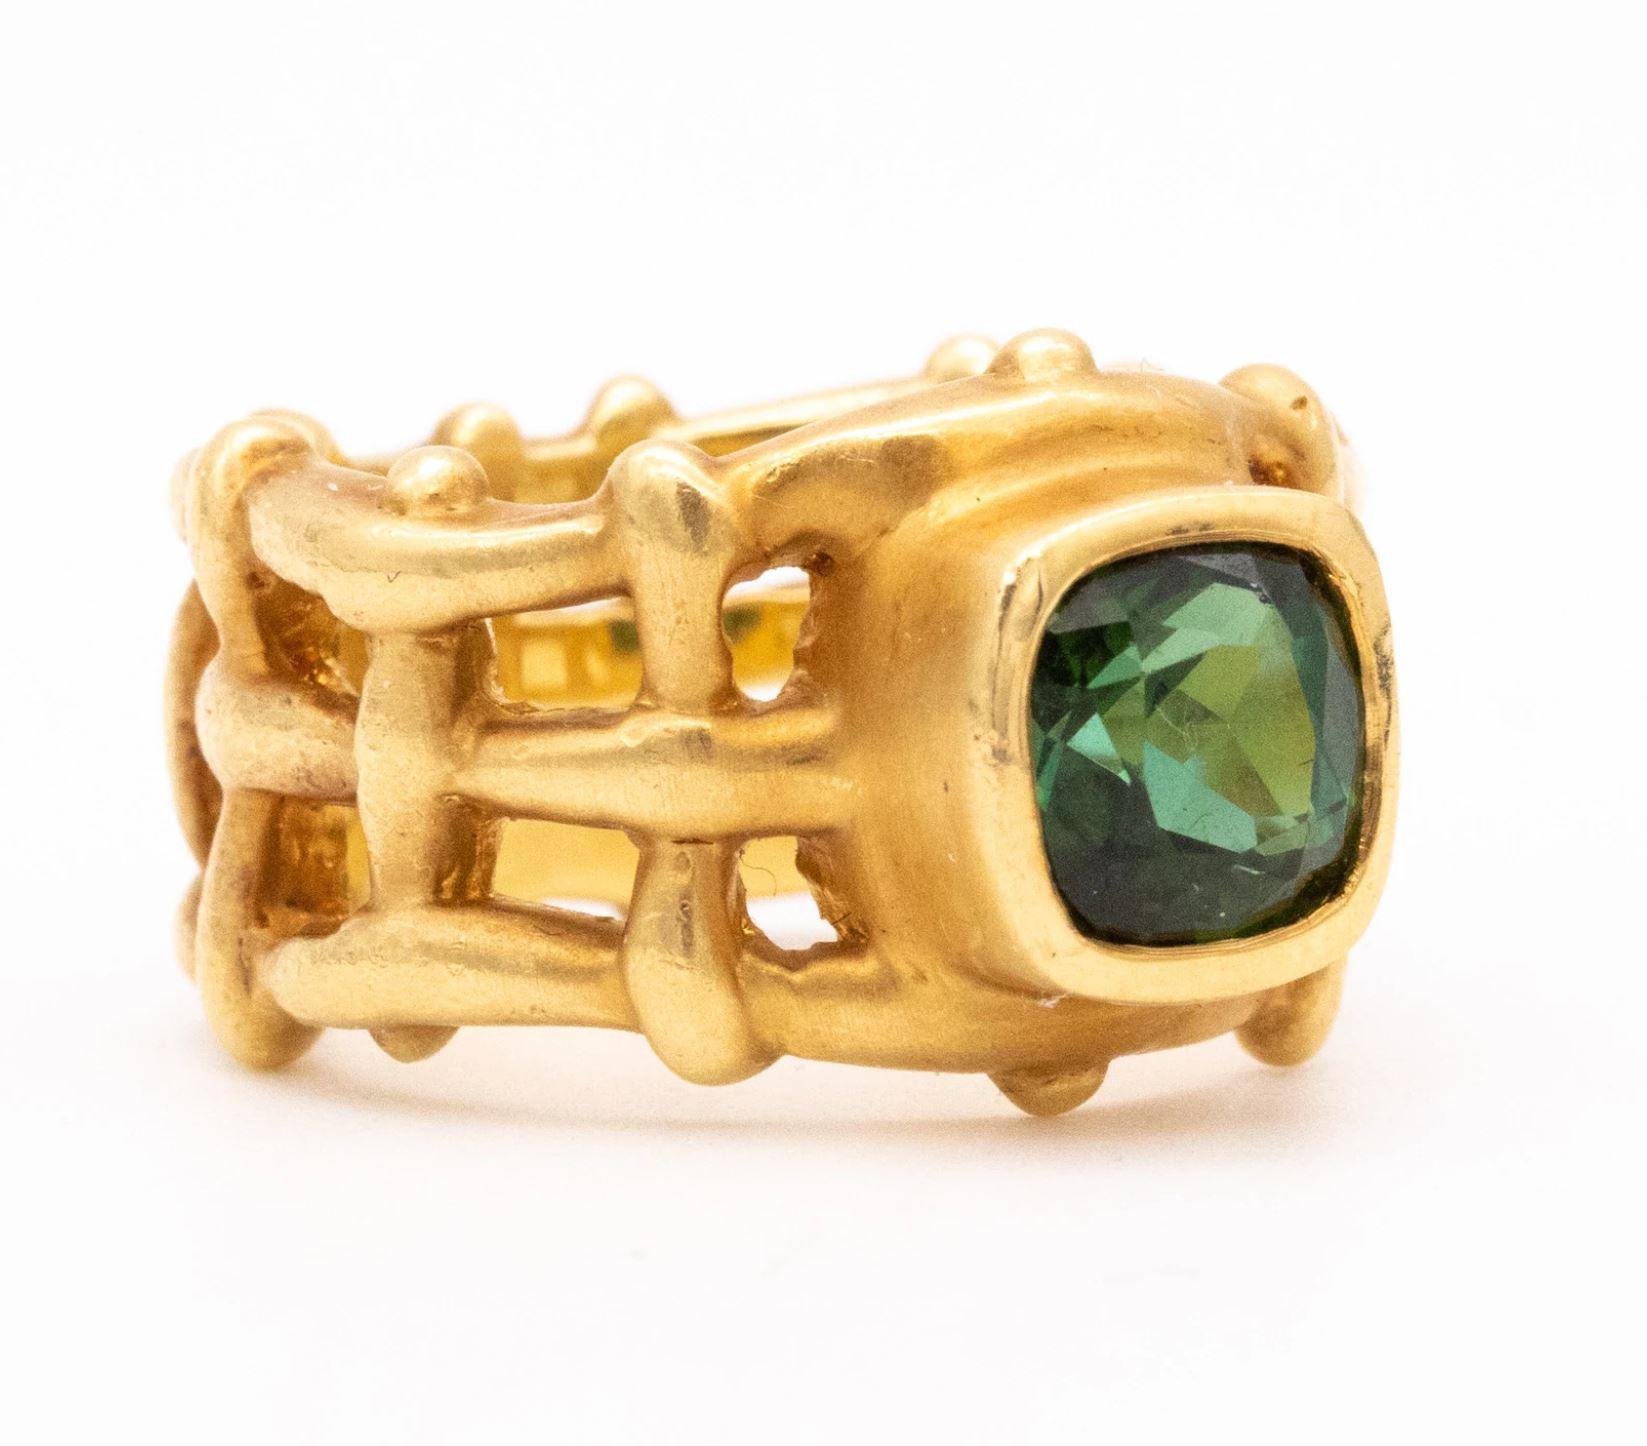 Rare ring designed by Angela Cummings.

This vintage piece was created at his own studio workshop in New Cork city back in the 1980. it was crafted in solid yellow gold of 18 karats, with a kind of organic motifs intertwined and textured frosted